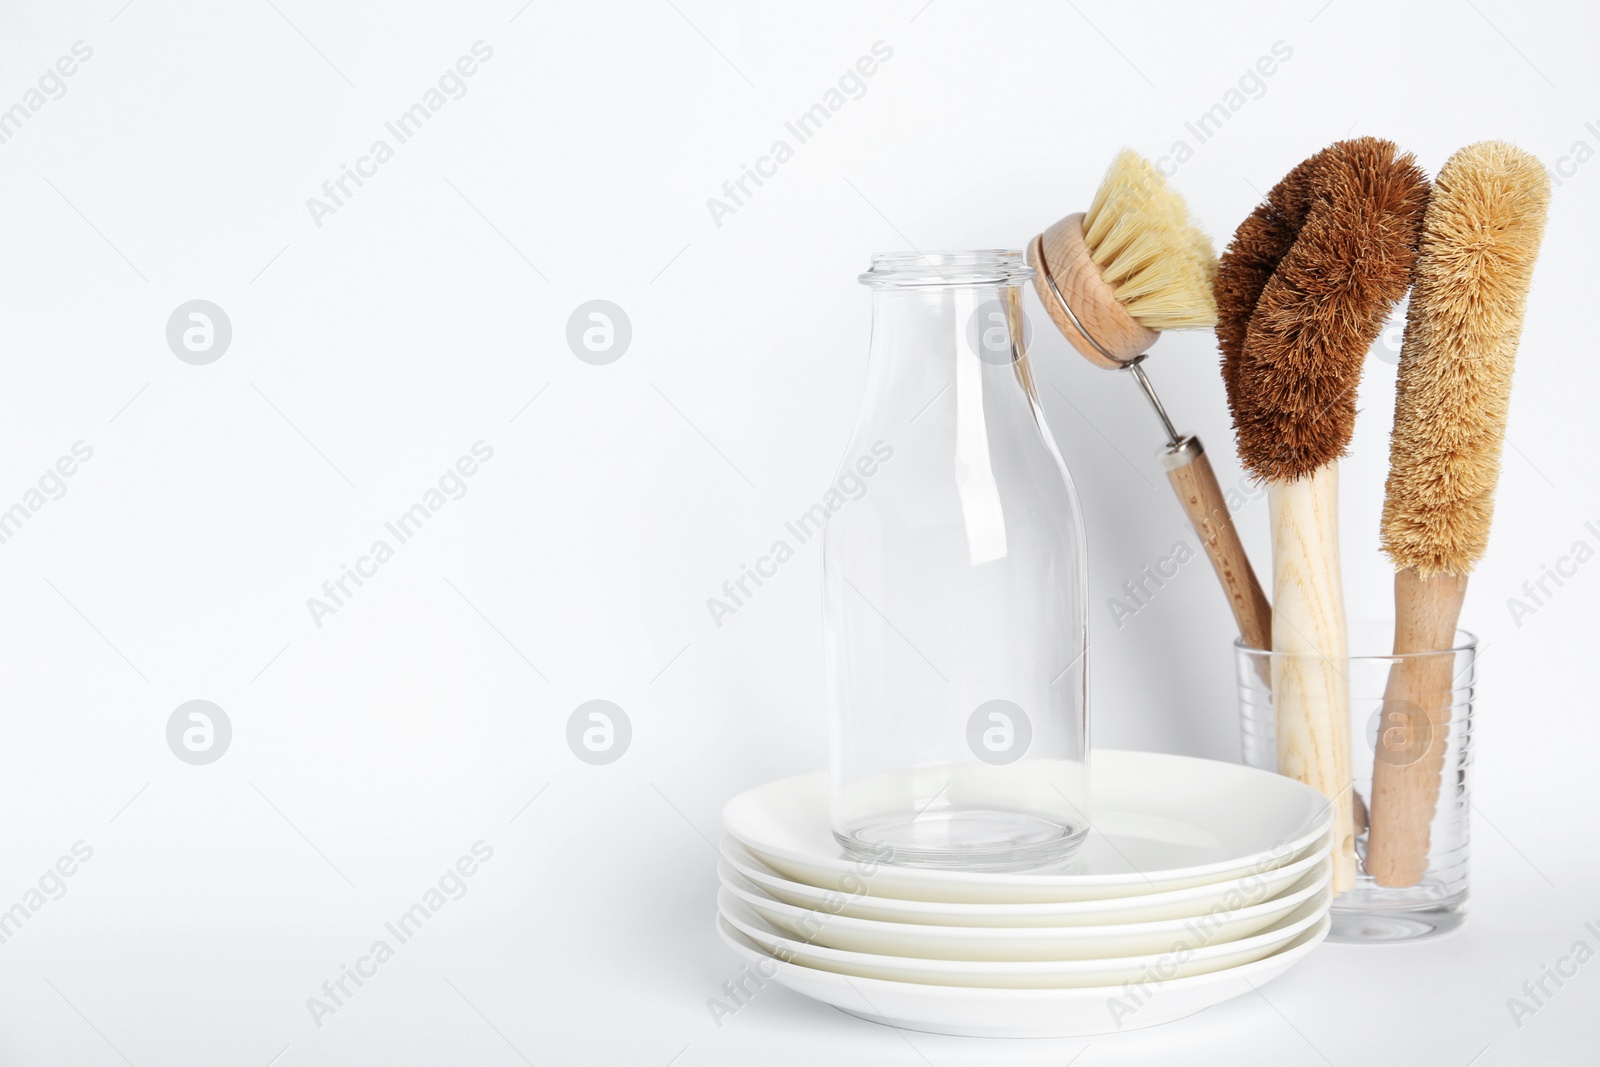 Photo of Cleaning brushes for dish washing, bottle and plates on white background